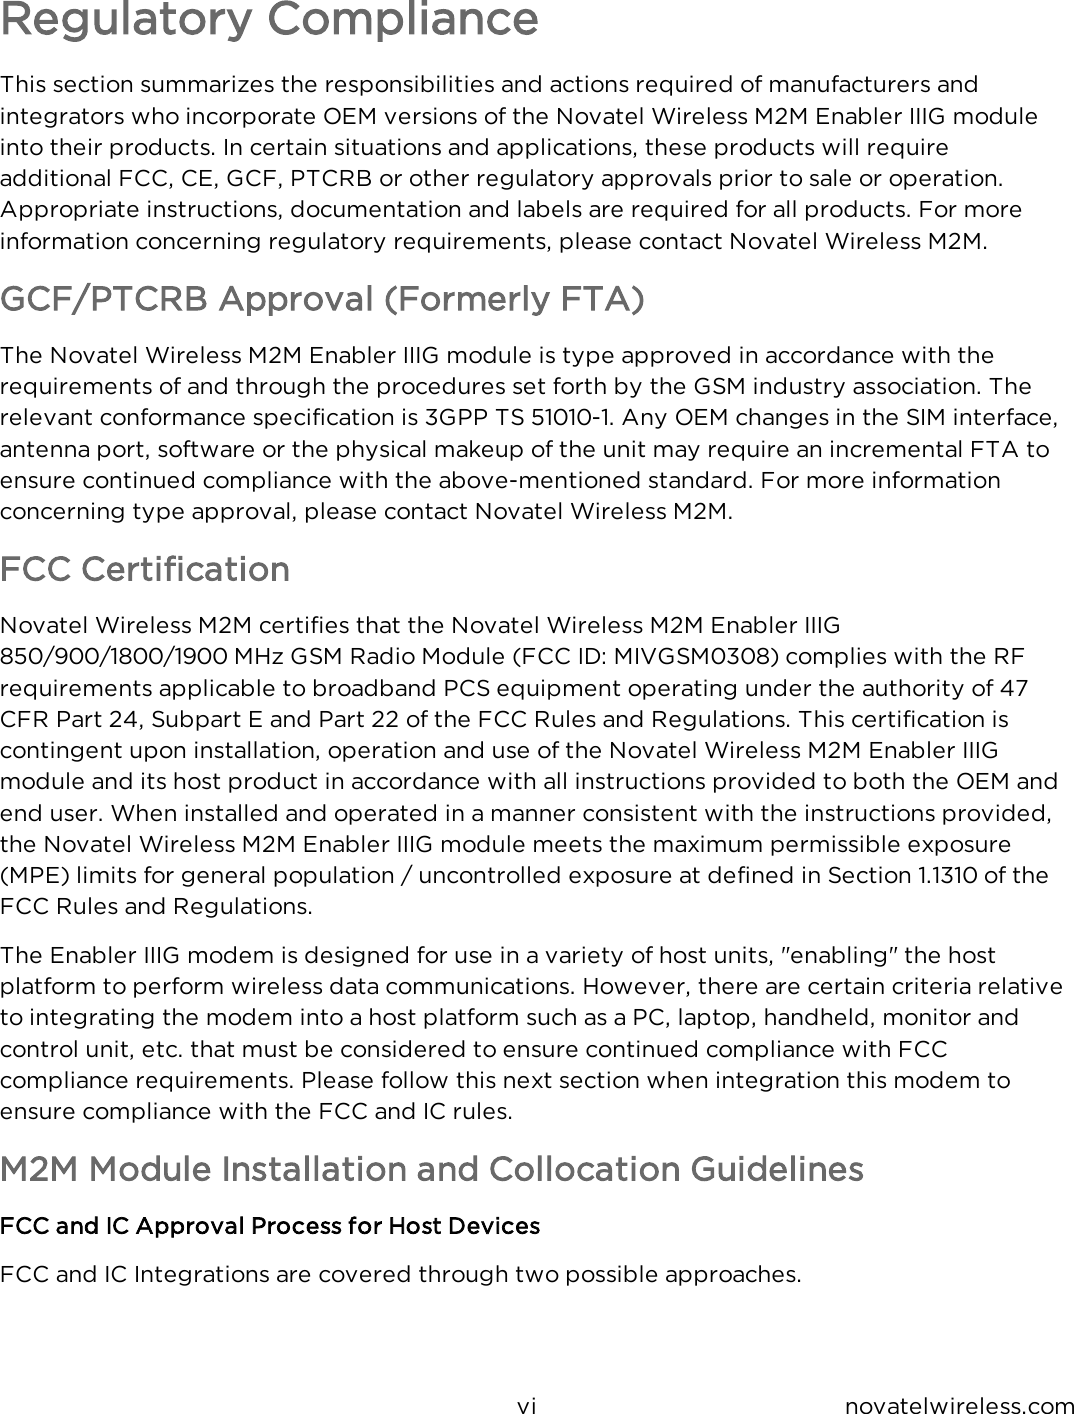 vi novatelwireless.comRegulatory ComplianceThis section summarizes the responsibilities and actions required of manufacturers and integrators who incorporate OEM versions of the Novatel Wireless M2M Enabler IIIG module into their products.  In certain situations and applications, these products will require additional FCC, CE, GCF, PTCRB or other regulatory approvals prior to sale or operation.  Appropriate instructions, documentation and labels are required for all products.  For more information concerning regulatory requirements, please contact Novatel Wireless M2M.GCF/PTCRB Approval (Formerly FTA)The Novatel Wireless M2M Enabler IIIG module is type approved in accordance with the requirements of and through the procedures set forth by the GSM industry association.  The relevant conformance specification is 3GPP TS 51010-1.  Any OEM changes in the SIM interface, antenna port, software or the physical makeup of the unit may require an incremental FTA to ensure continued compliance with the above-mentioned standard.  For more information concerning type approval, please contact Novatel Wireless M2M.FCC CertificationNovatel Wireless M2M certifies that the Novatel Wireless M2M Enabler IIIG 850/900/1800/1900 MHz GSM Radio Module (FCC ID: MIVGSM0308) complies with the RF requirements applicable to broadband PCS equipment operating under the authority of 47 CFR Part 24, Subpart E and Part 22 of the FCC Rules and Regulations.  This certification is contingent upon installation, operation and use of the Novatel Wireless M2M Enabler IIIG module and its host product in accordance with all instructions provided to both the OEM and end user.  When installed and operated in a manner consistent with the instructions provided, the Novatel Wireless M2M Enabler IIIG module meets the maximum permissible exposure (MPE) limits for general population / uncontrolled exposure at defined in Section 1.1310 of the FCC Rules and Regulations.The Enabler IIIG modem is designed for use in a variety of host units, &quot;enabling&quot; the host platform to perform wireless data communications.  However, there are certain criteria relative to integrating the modem into a host platform such as a PC, laptop, handheld, monitor and control unit, etc. that must be considered to ensure continued compliance with FCC compliance requirements. Please follow this next section when integration this modem to ensure compliance with the FCC and IC rules.M2M Module Installation and Collocation GuidelinesFCC and IC Approval Process for Host DevicesFCC and IC Integrations are covered through two possible approaches.